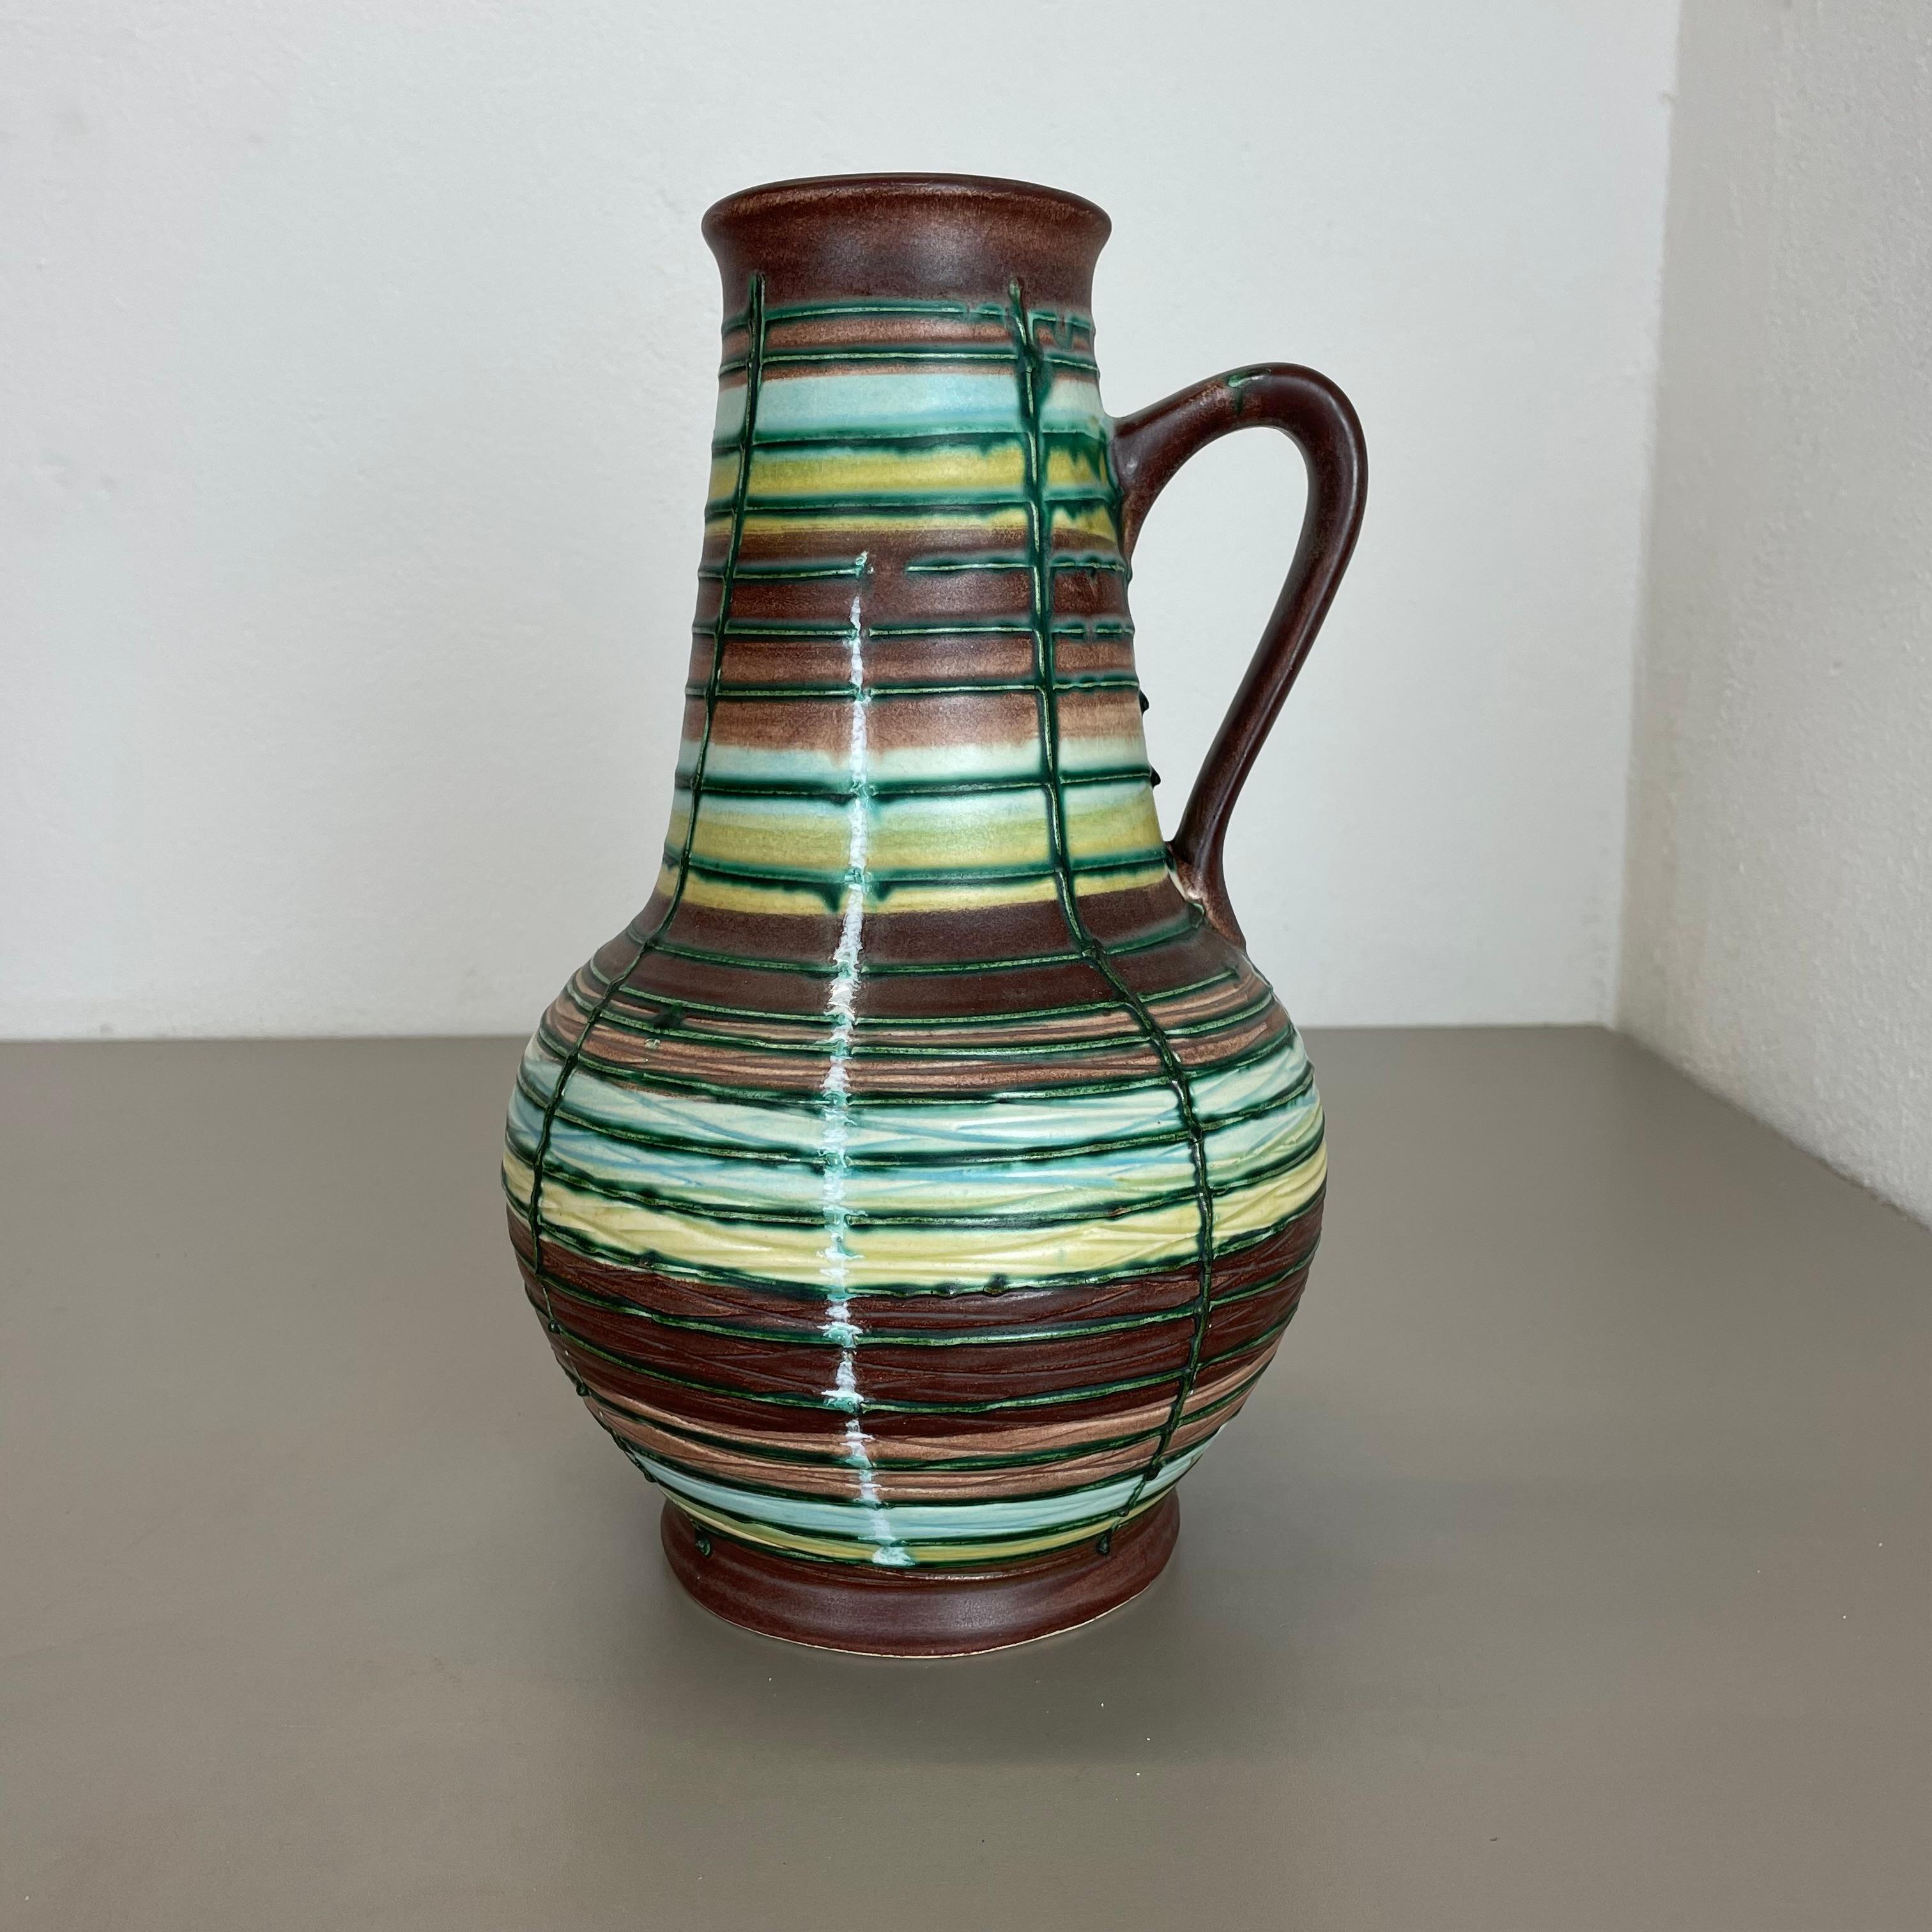 Article:

Pottery ceramic vase


Producer:

BAY Ceramic, Germany



Decade:

1970s



Description:

Original vintage 1970s pottery ceramic vase made in Germany. High quality German production with a nice abstract painting and super colorful surface.